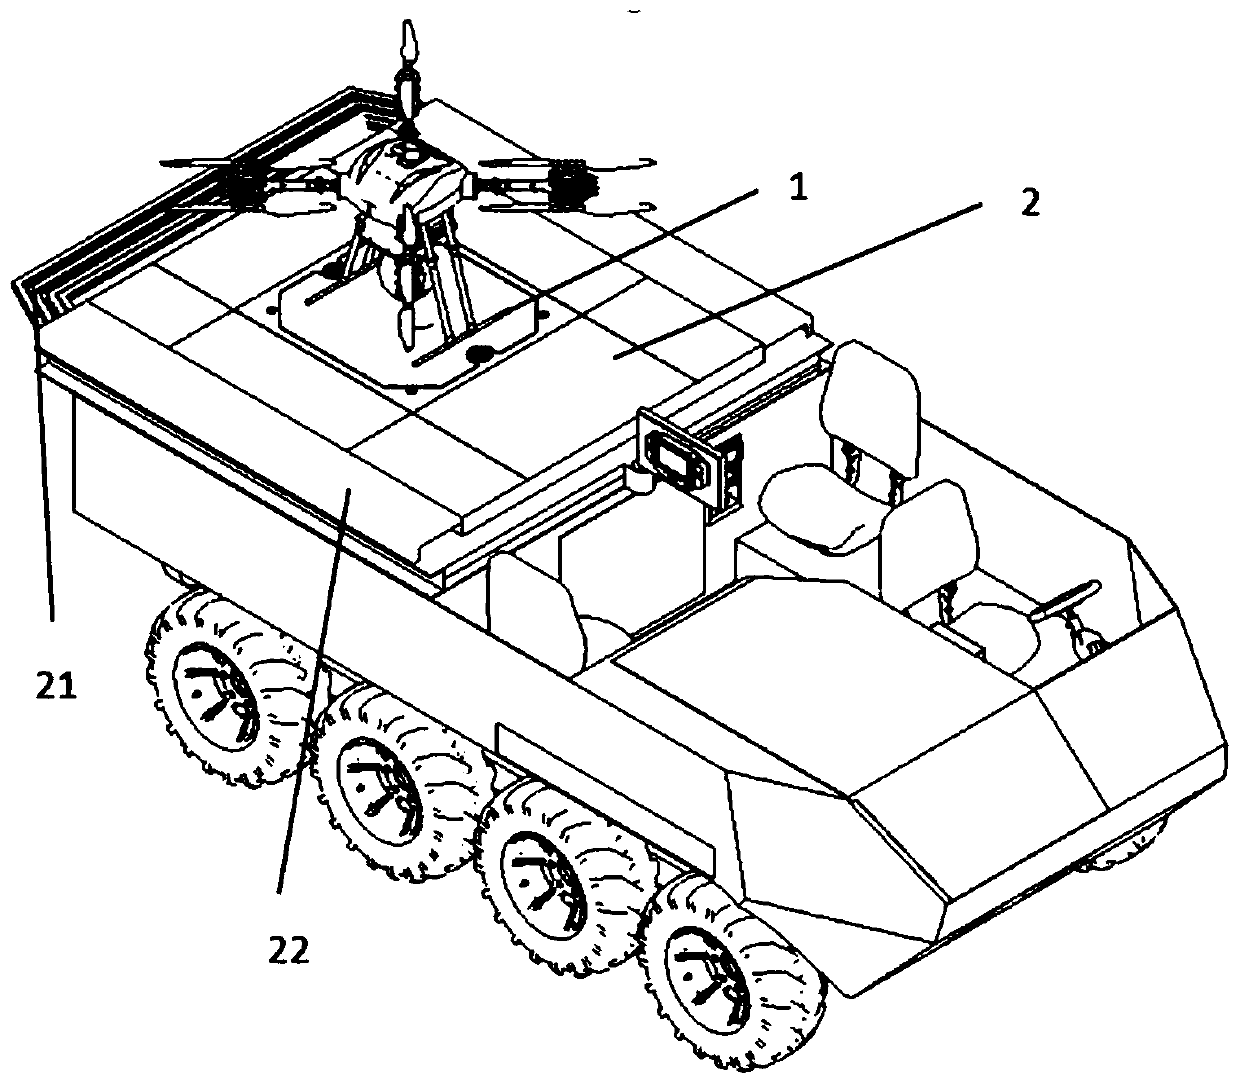 Automatic unfolding ground recovery platform for mooring unmanned aerial vehicle